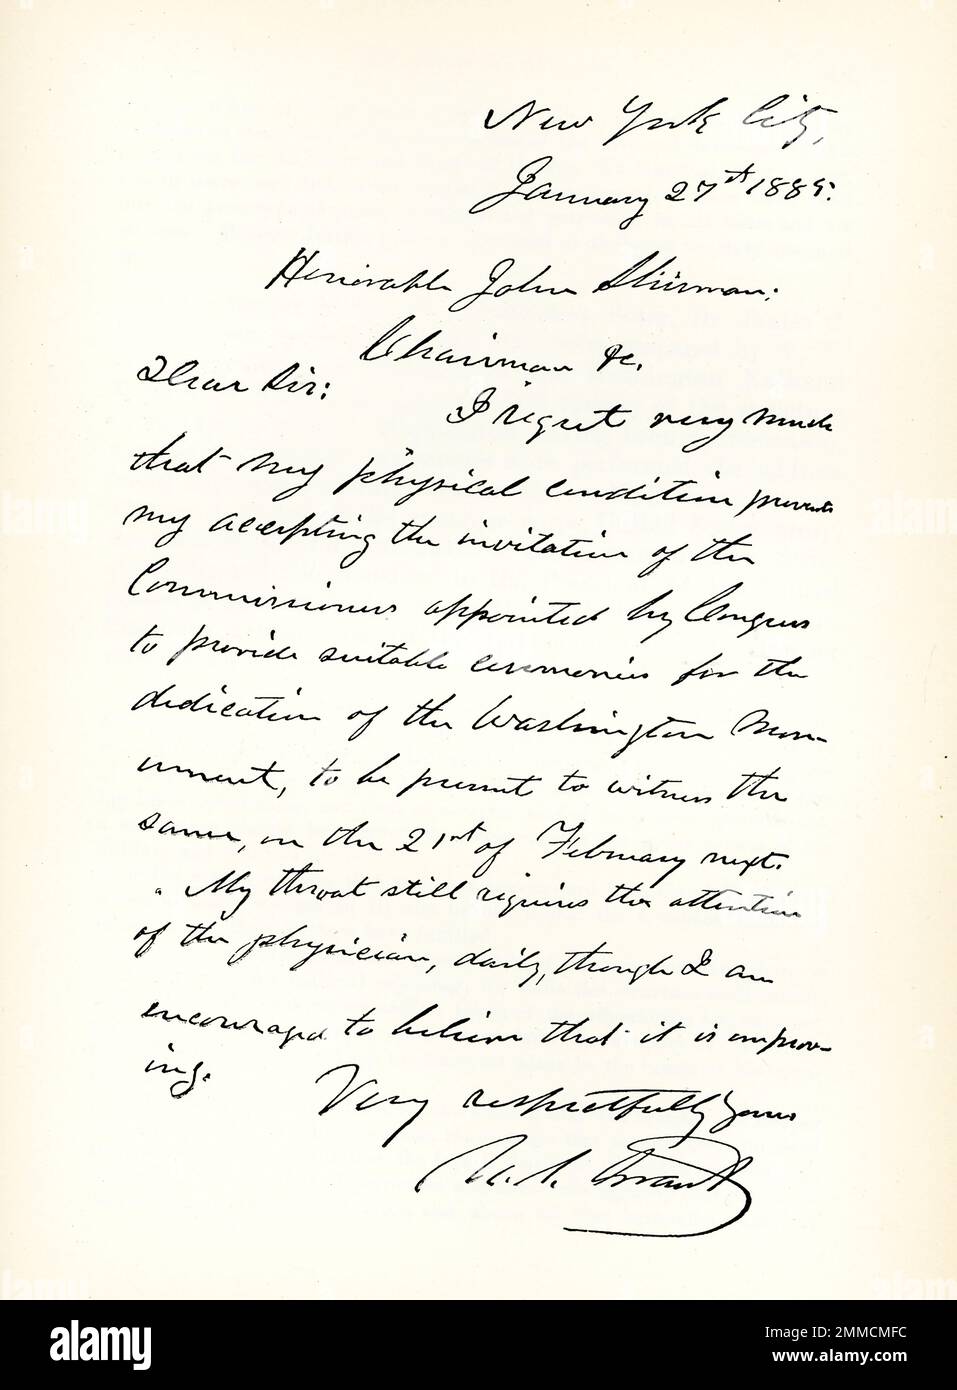 This 1892 images shows a letter from Ulysses s Grant dated January 27, 1885 and signed by Grant. 18th President of the United States  The letter reads: 'New York City,  January 27, 1885.  Honorable John Sherman, Chairman.  Dear Sir: I regret very much that my physical condition prevents my accepting the invitation of the Commission appointed by Congress to provide suitable ceremonies for the dedication of the Washington monument, to be present to witness the same, on the 21st of February next. My throat still requires the attention of the physician, daily, though I am encouraged to believe tha Stock Photo